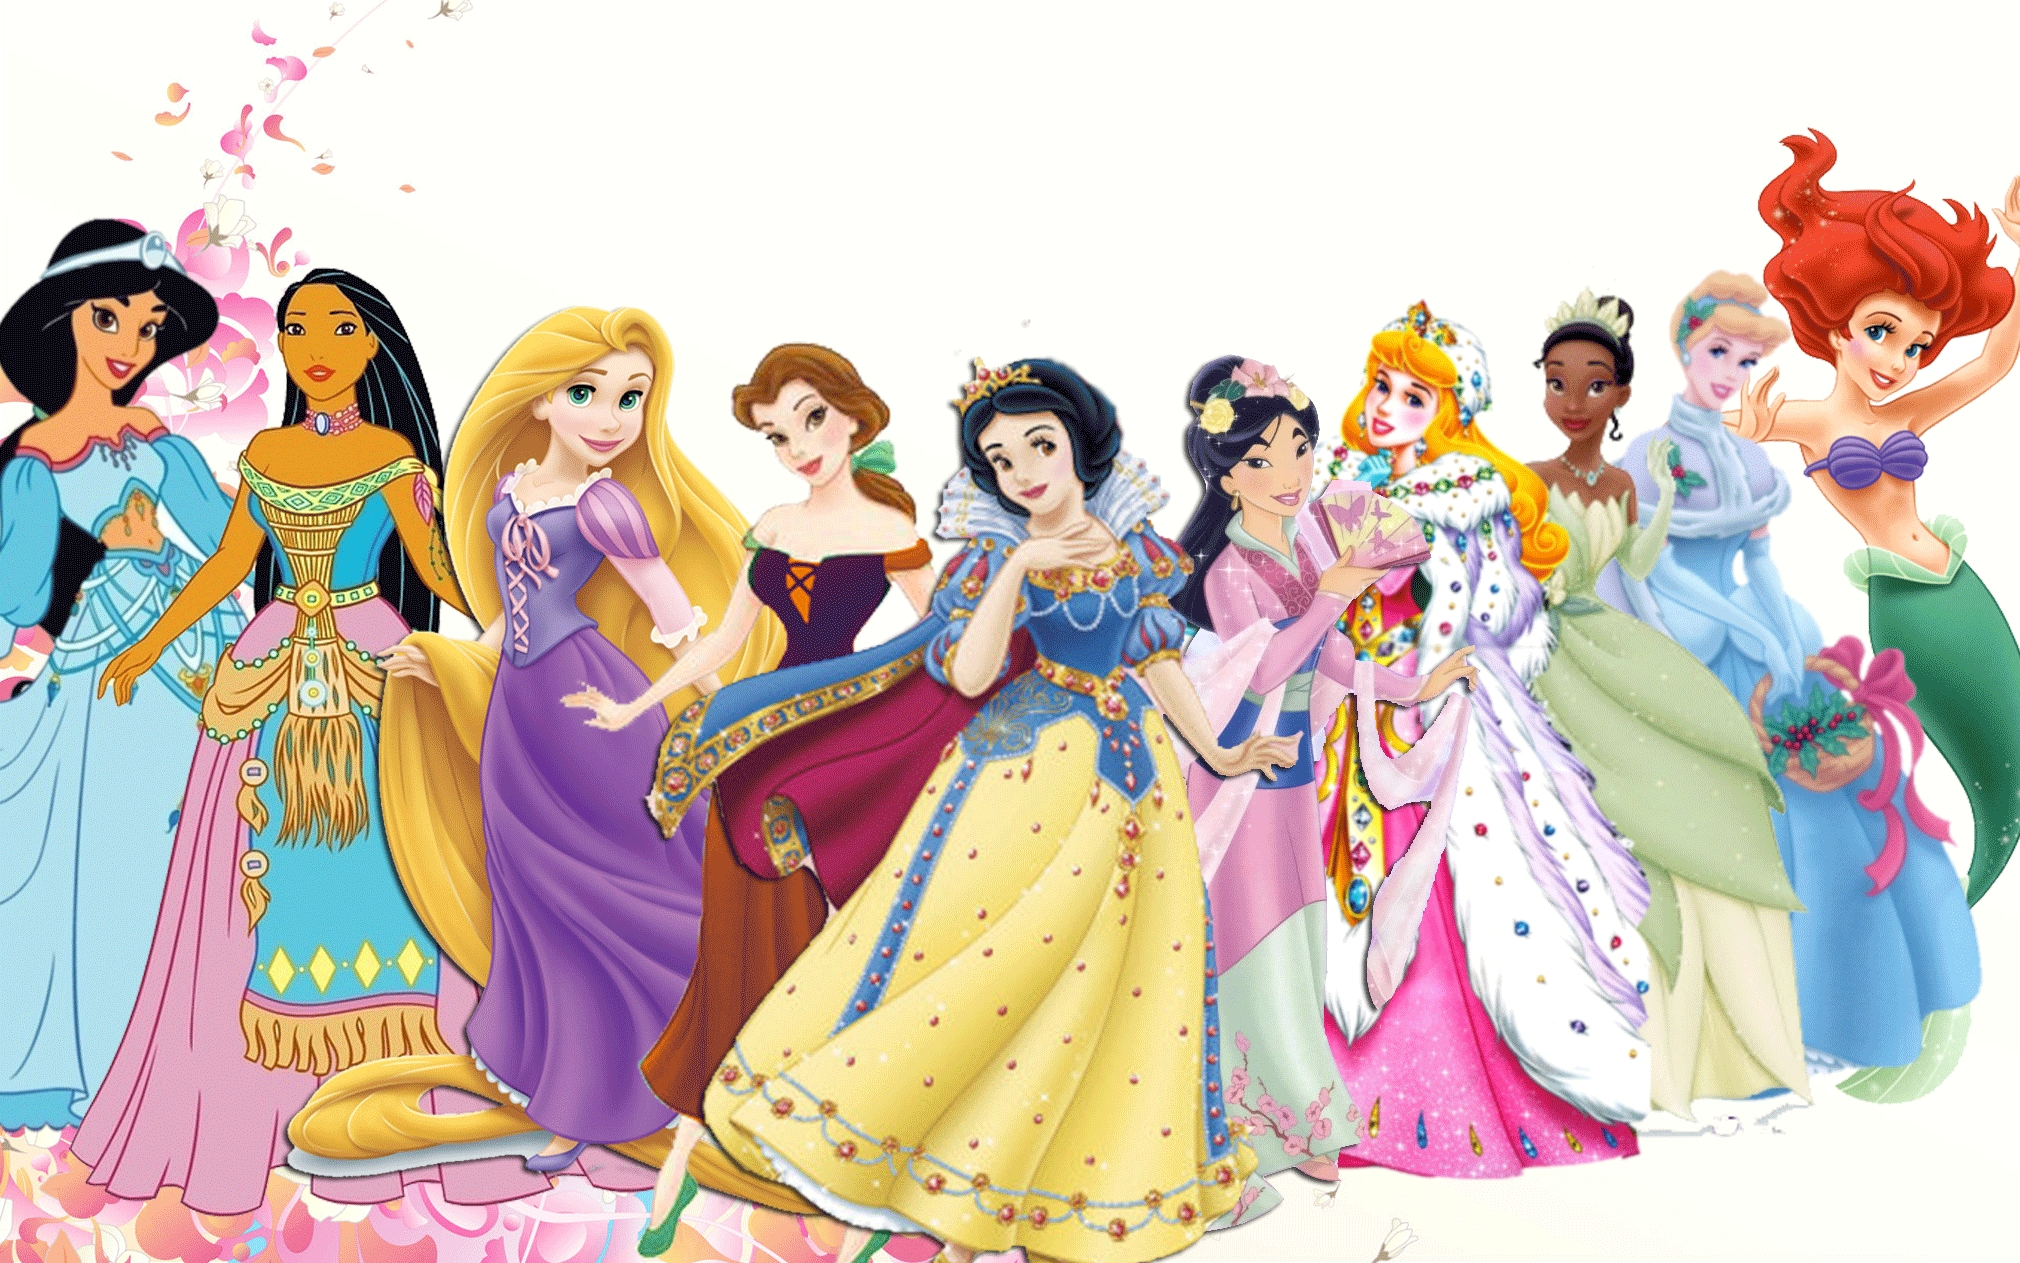 Disney Princess Hd Wallpaper Background Download
 Cute Barbie Wallpapers For Mobile